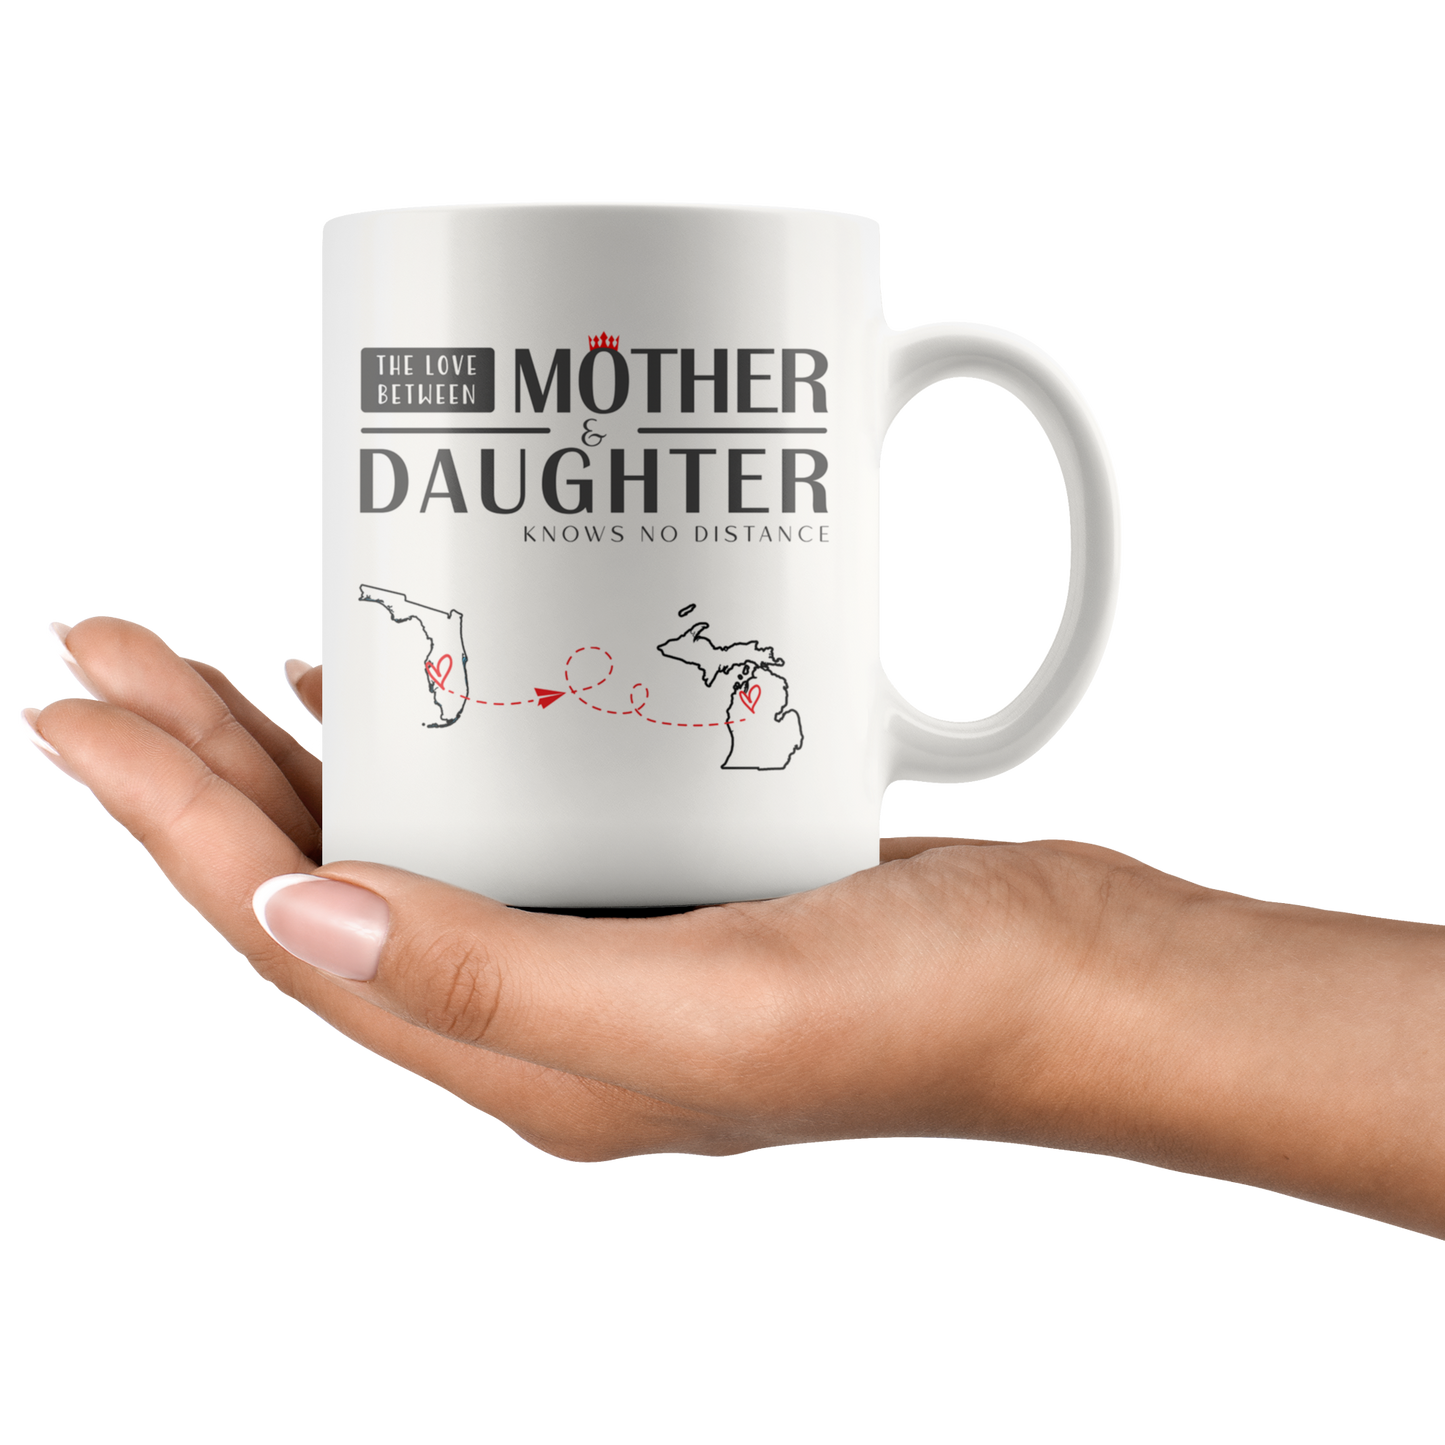 M-20527703-sp-26912 - [ Florida | Michigan ] (mug_11oz_white) Long Distance Mom - The Love Between Mother  Daughter Knows